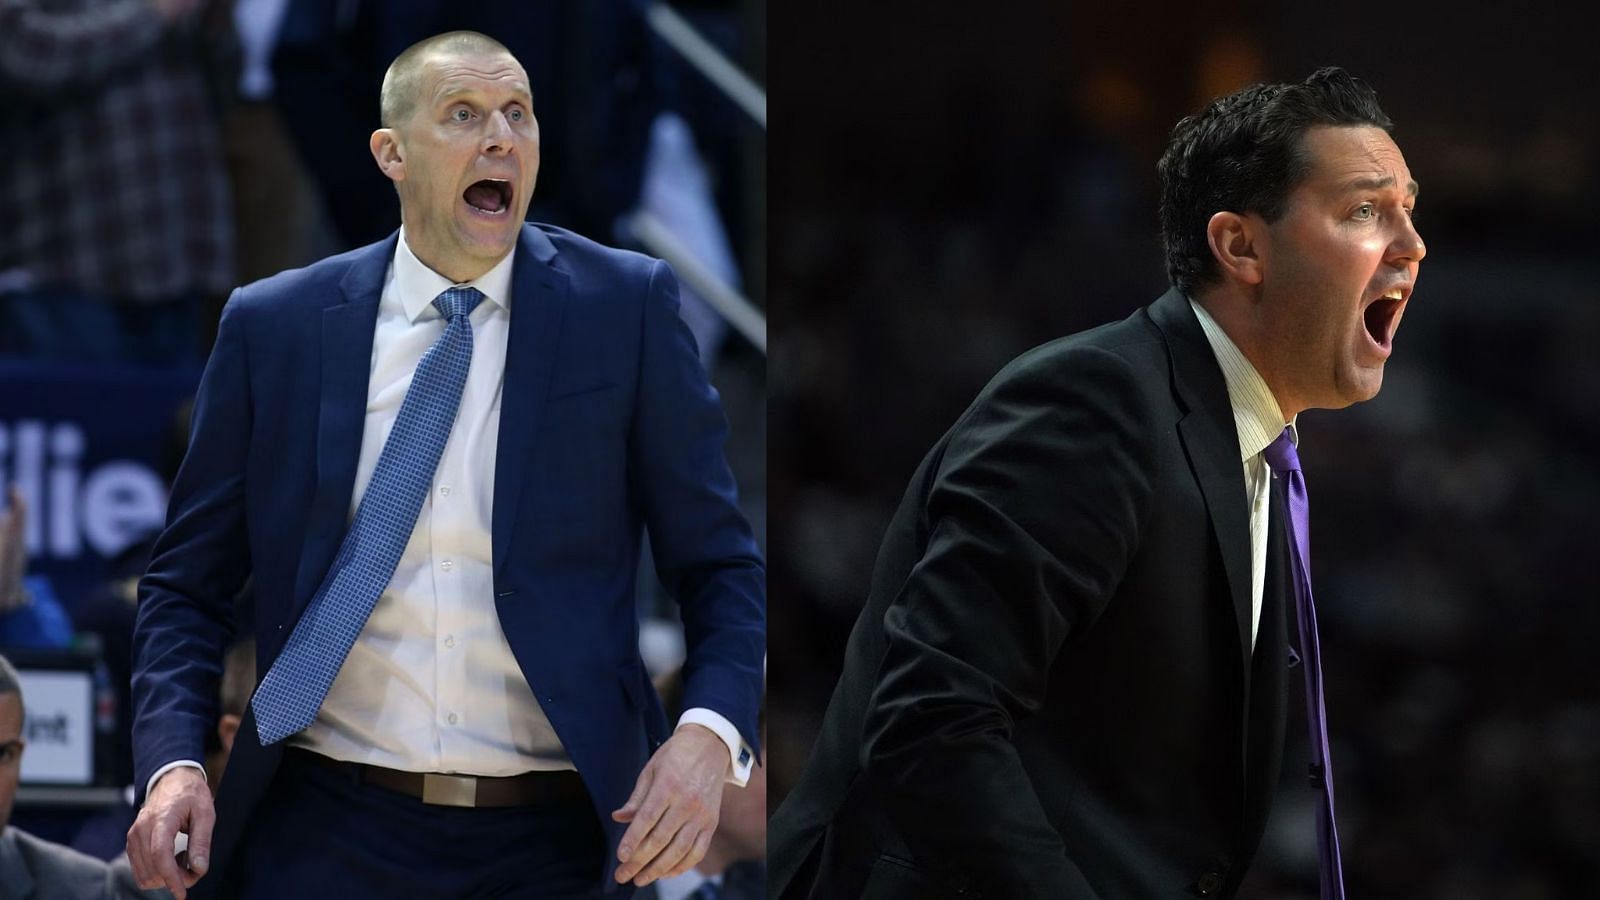 Mark Pope (left) of BYU and Bryce Drew (right) of Grand Canyon could be potential Washington head coaches.